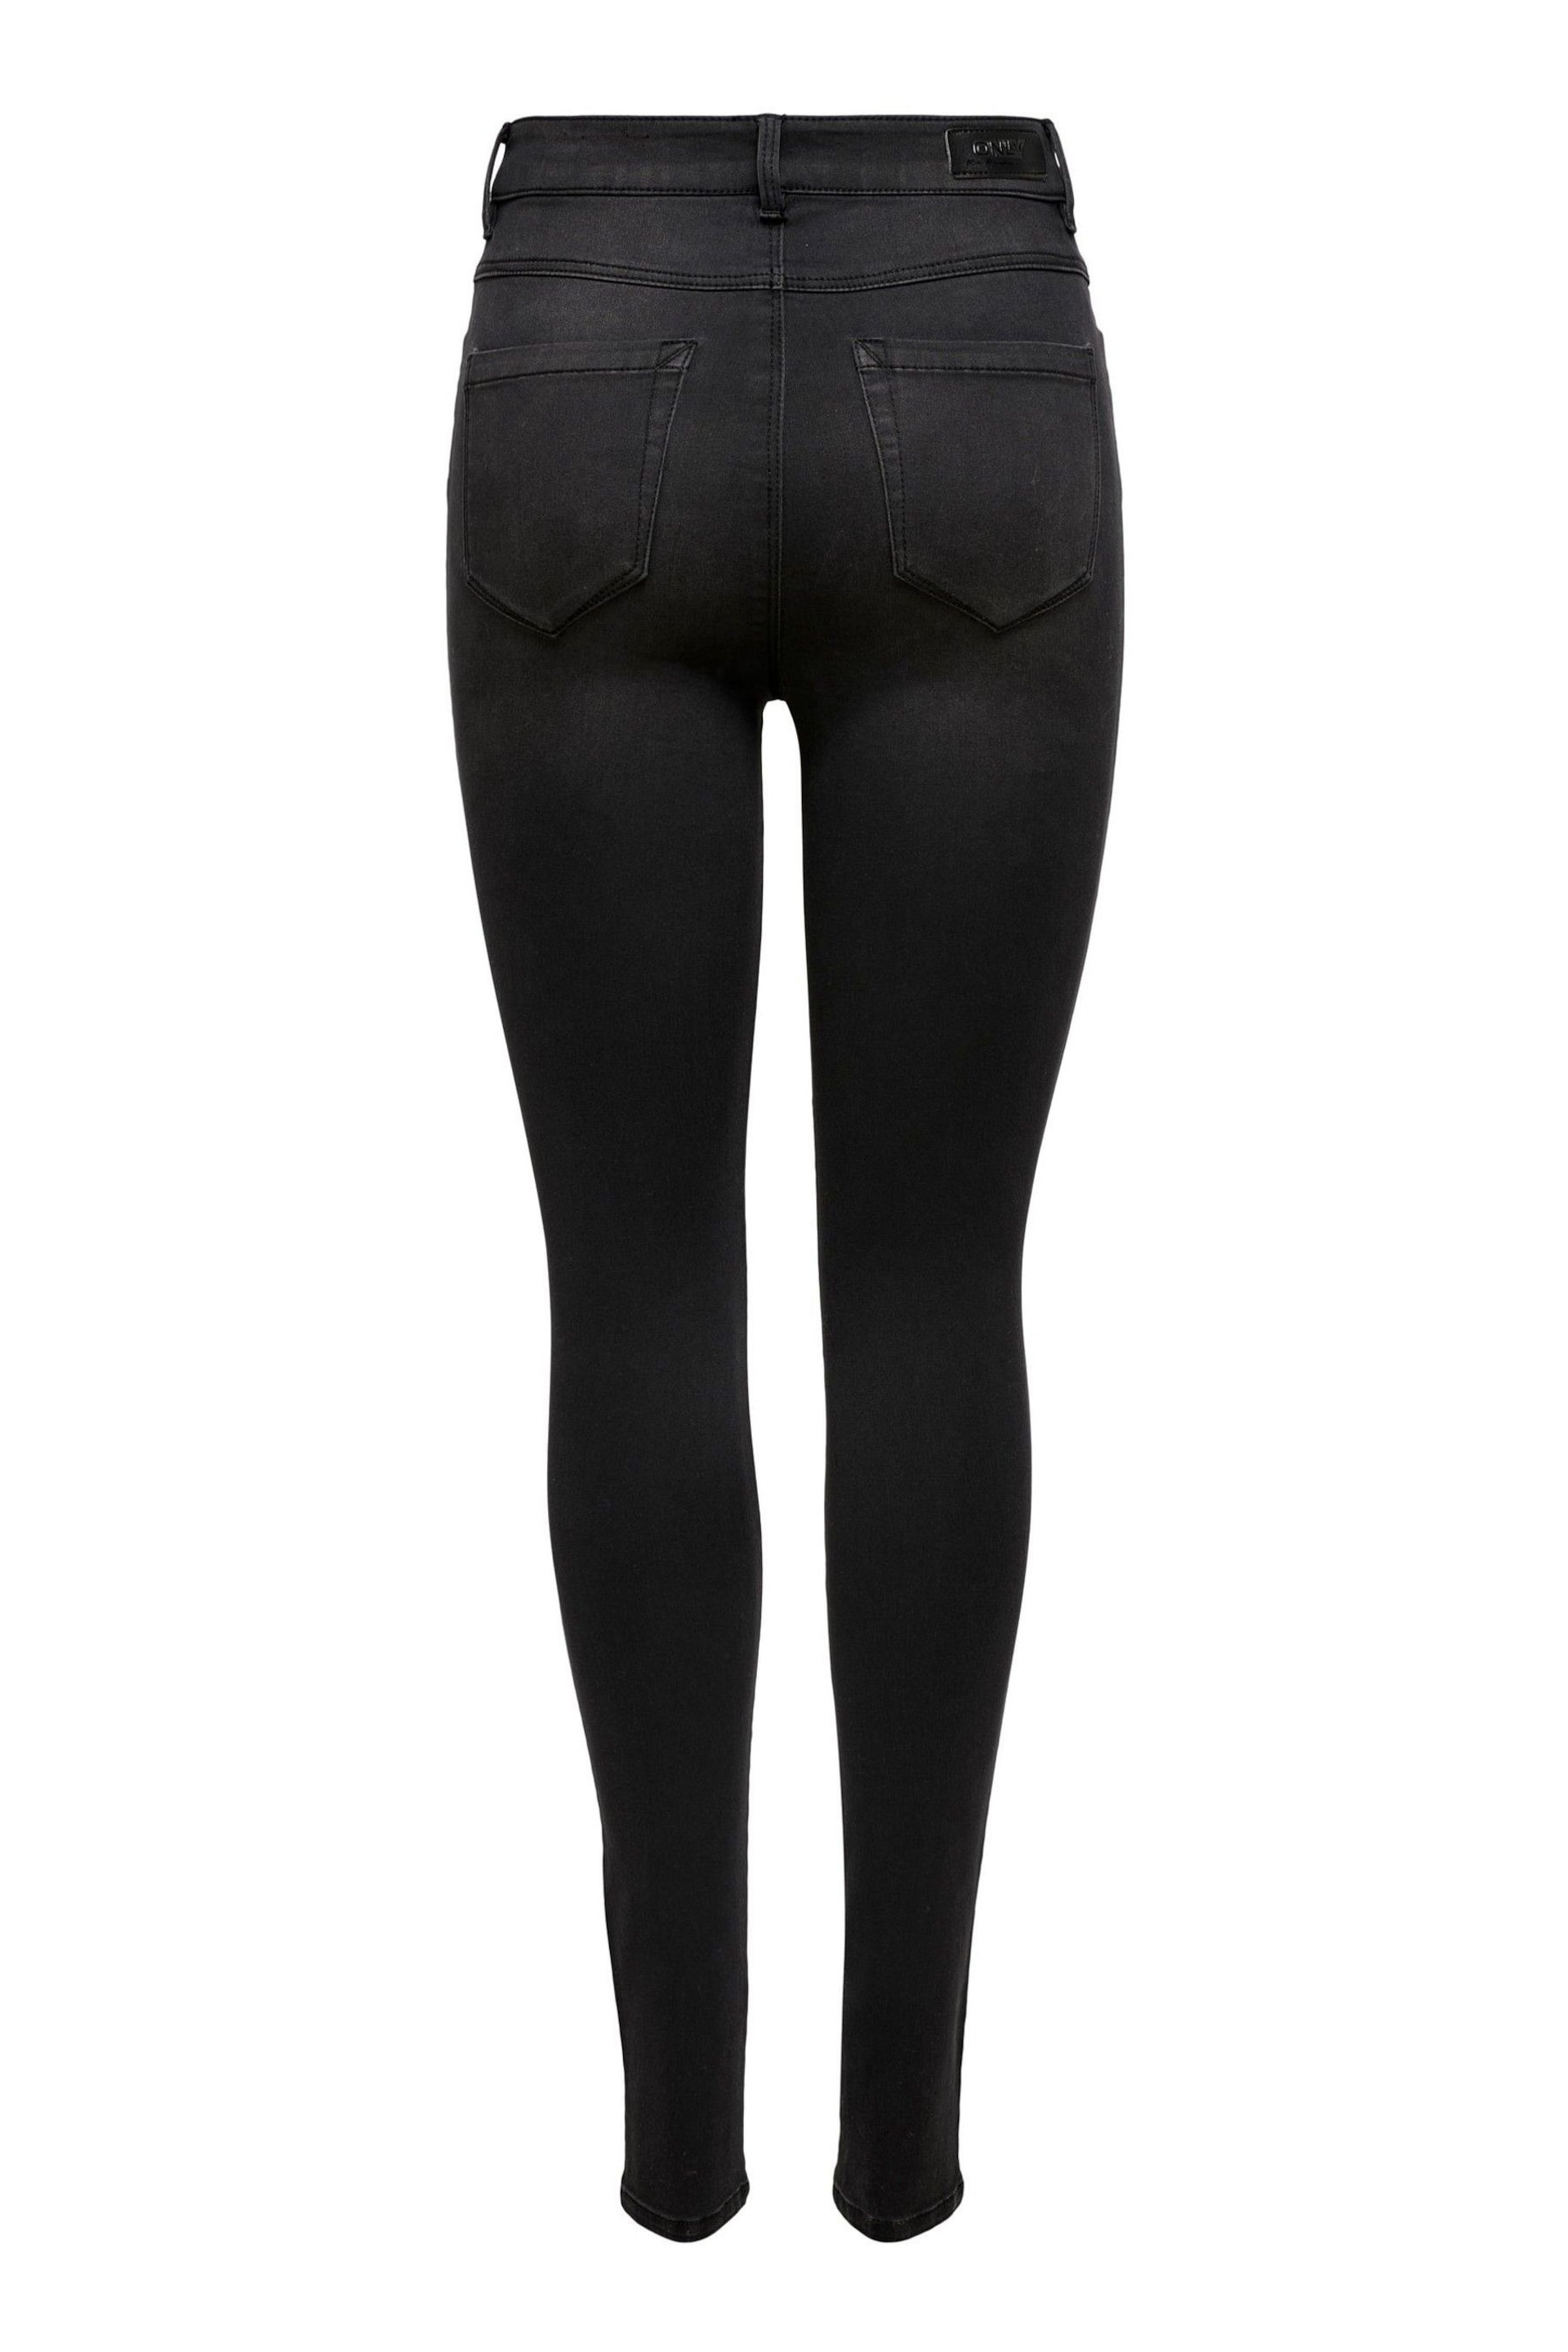 ONLY Black High Waisted Stretch Skinny Royal Jeans - Image 7 of 7